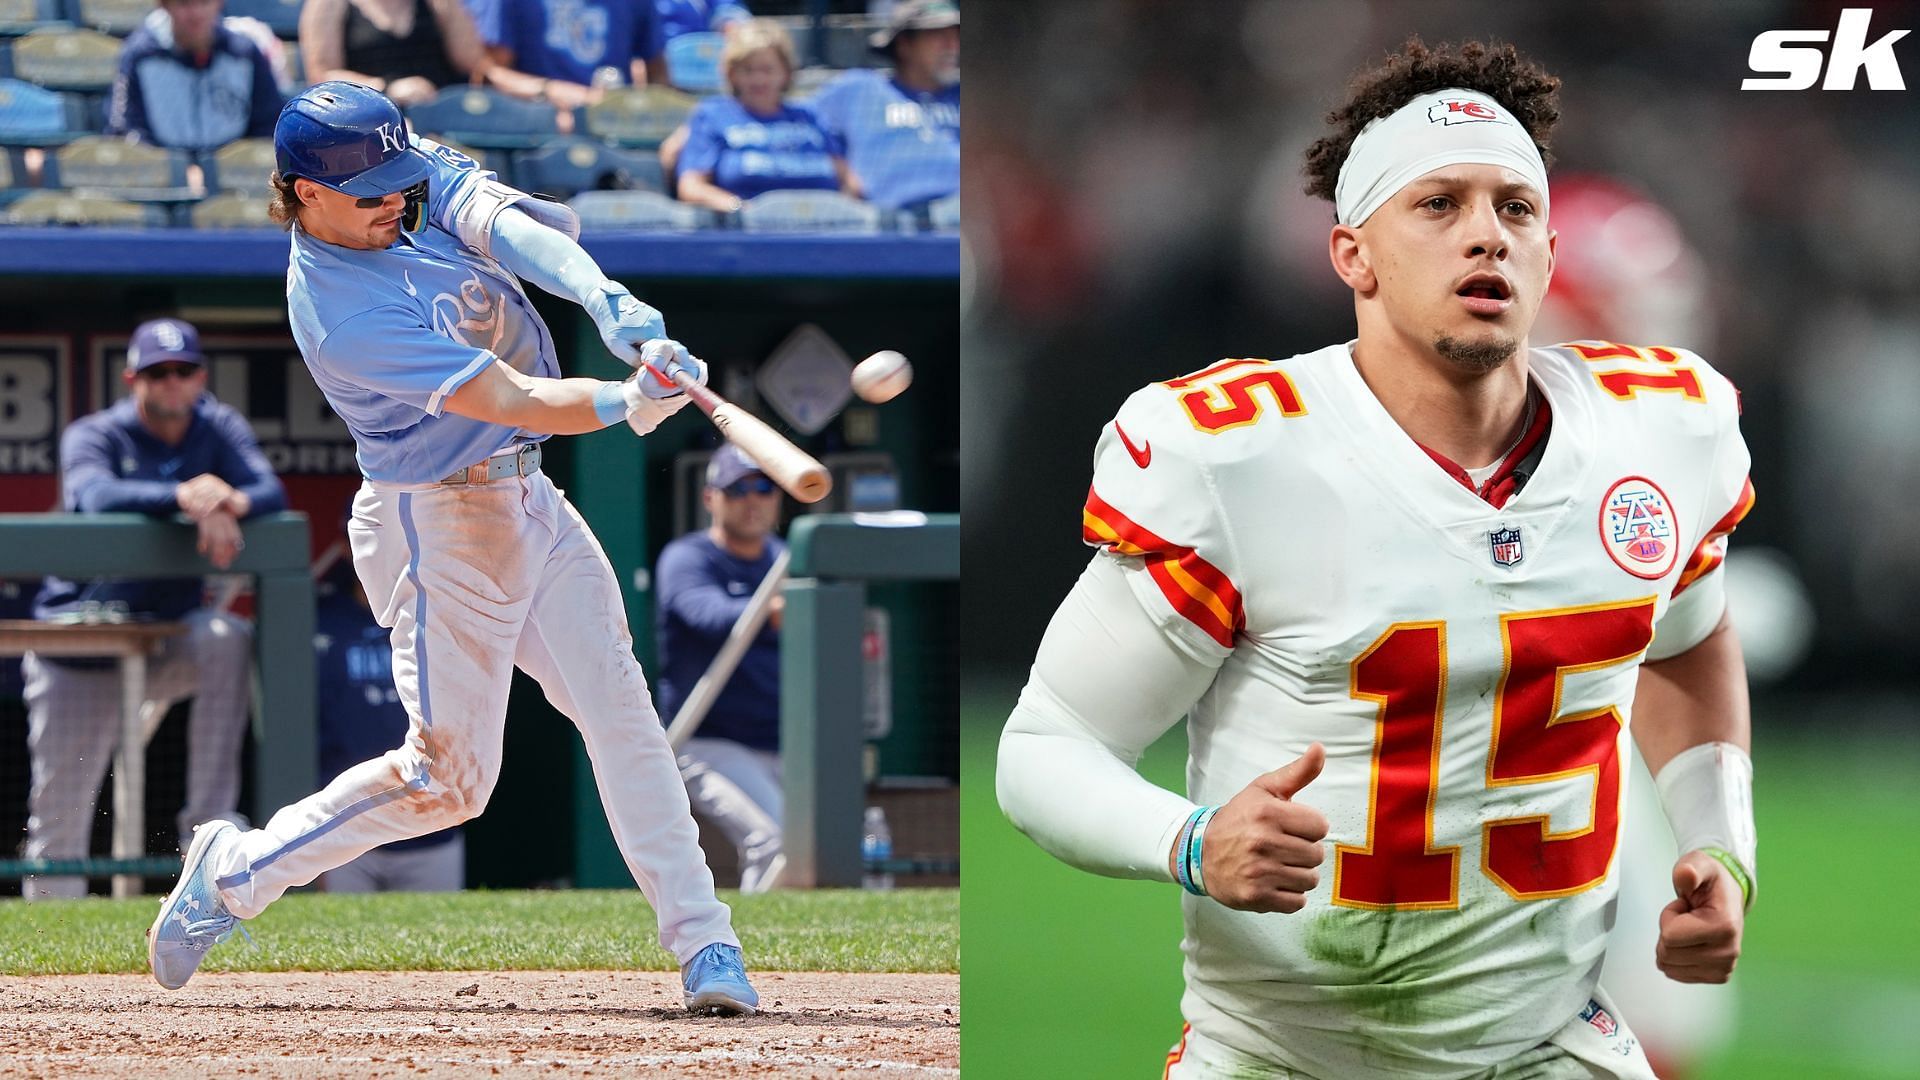 Bobby Witt Jr. of the KC Royals and Patrick Mahomes of the KC Chiefs